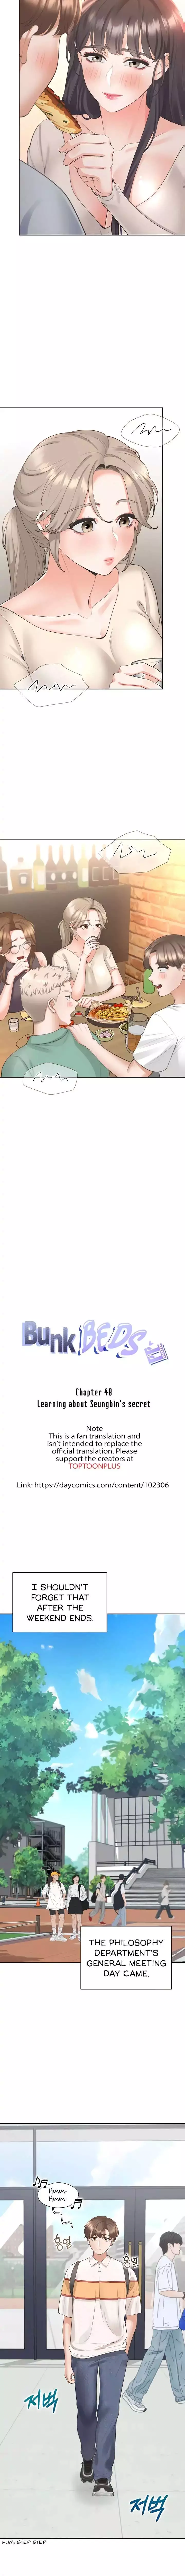 Bunk Beds - 48 page 5-8a1adce6